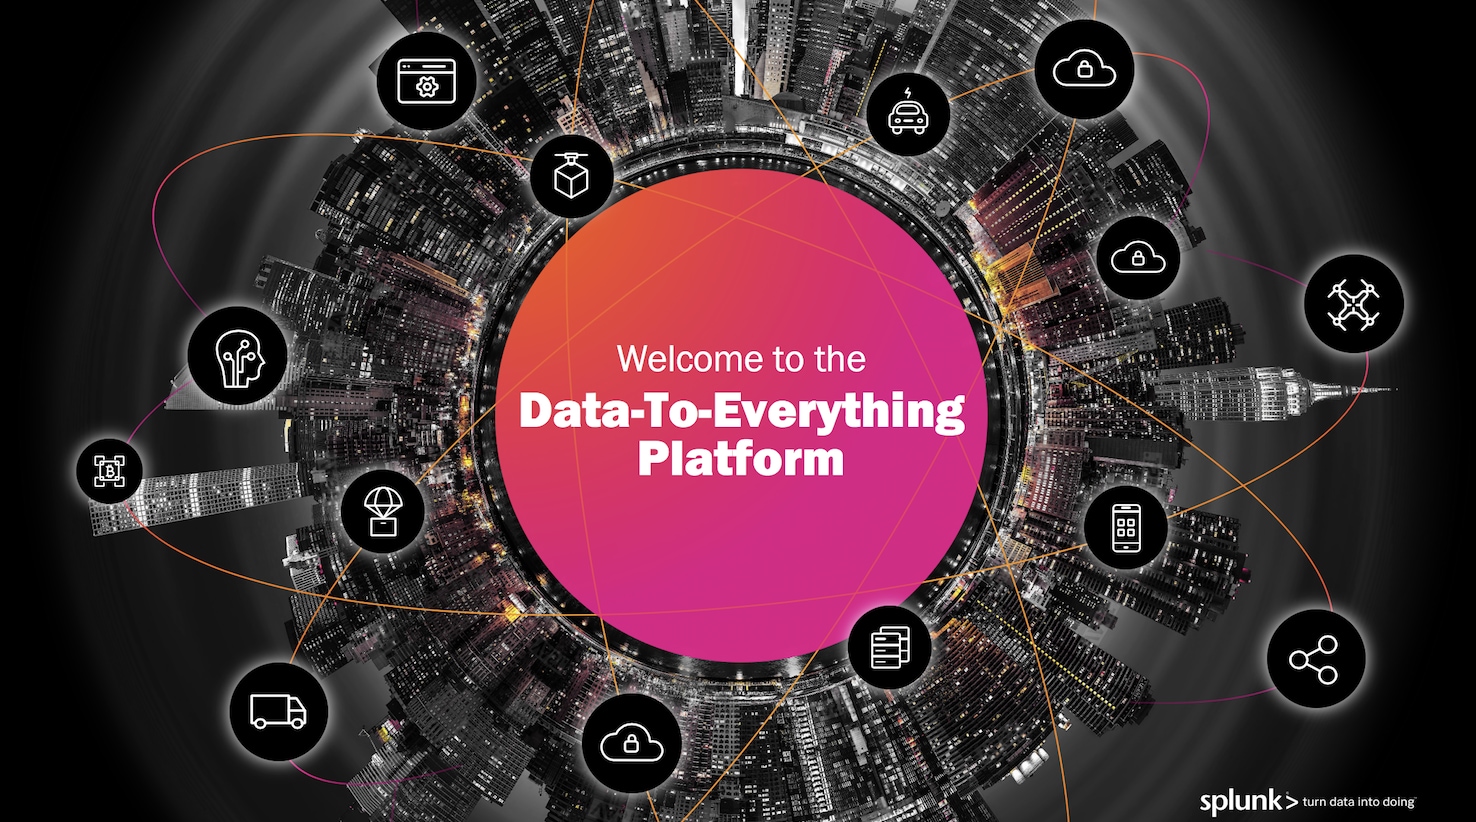 The Data-To-Everything-Platform